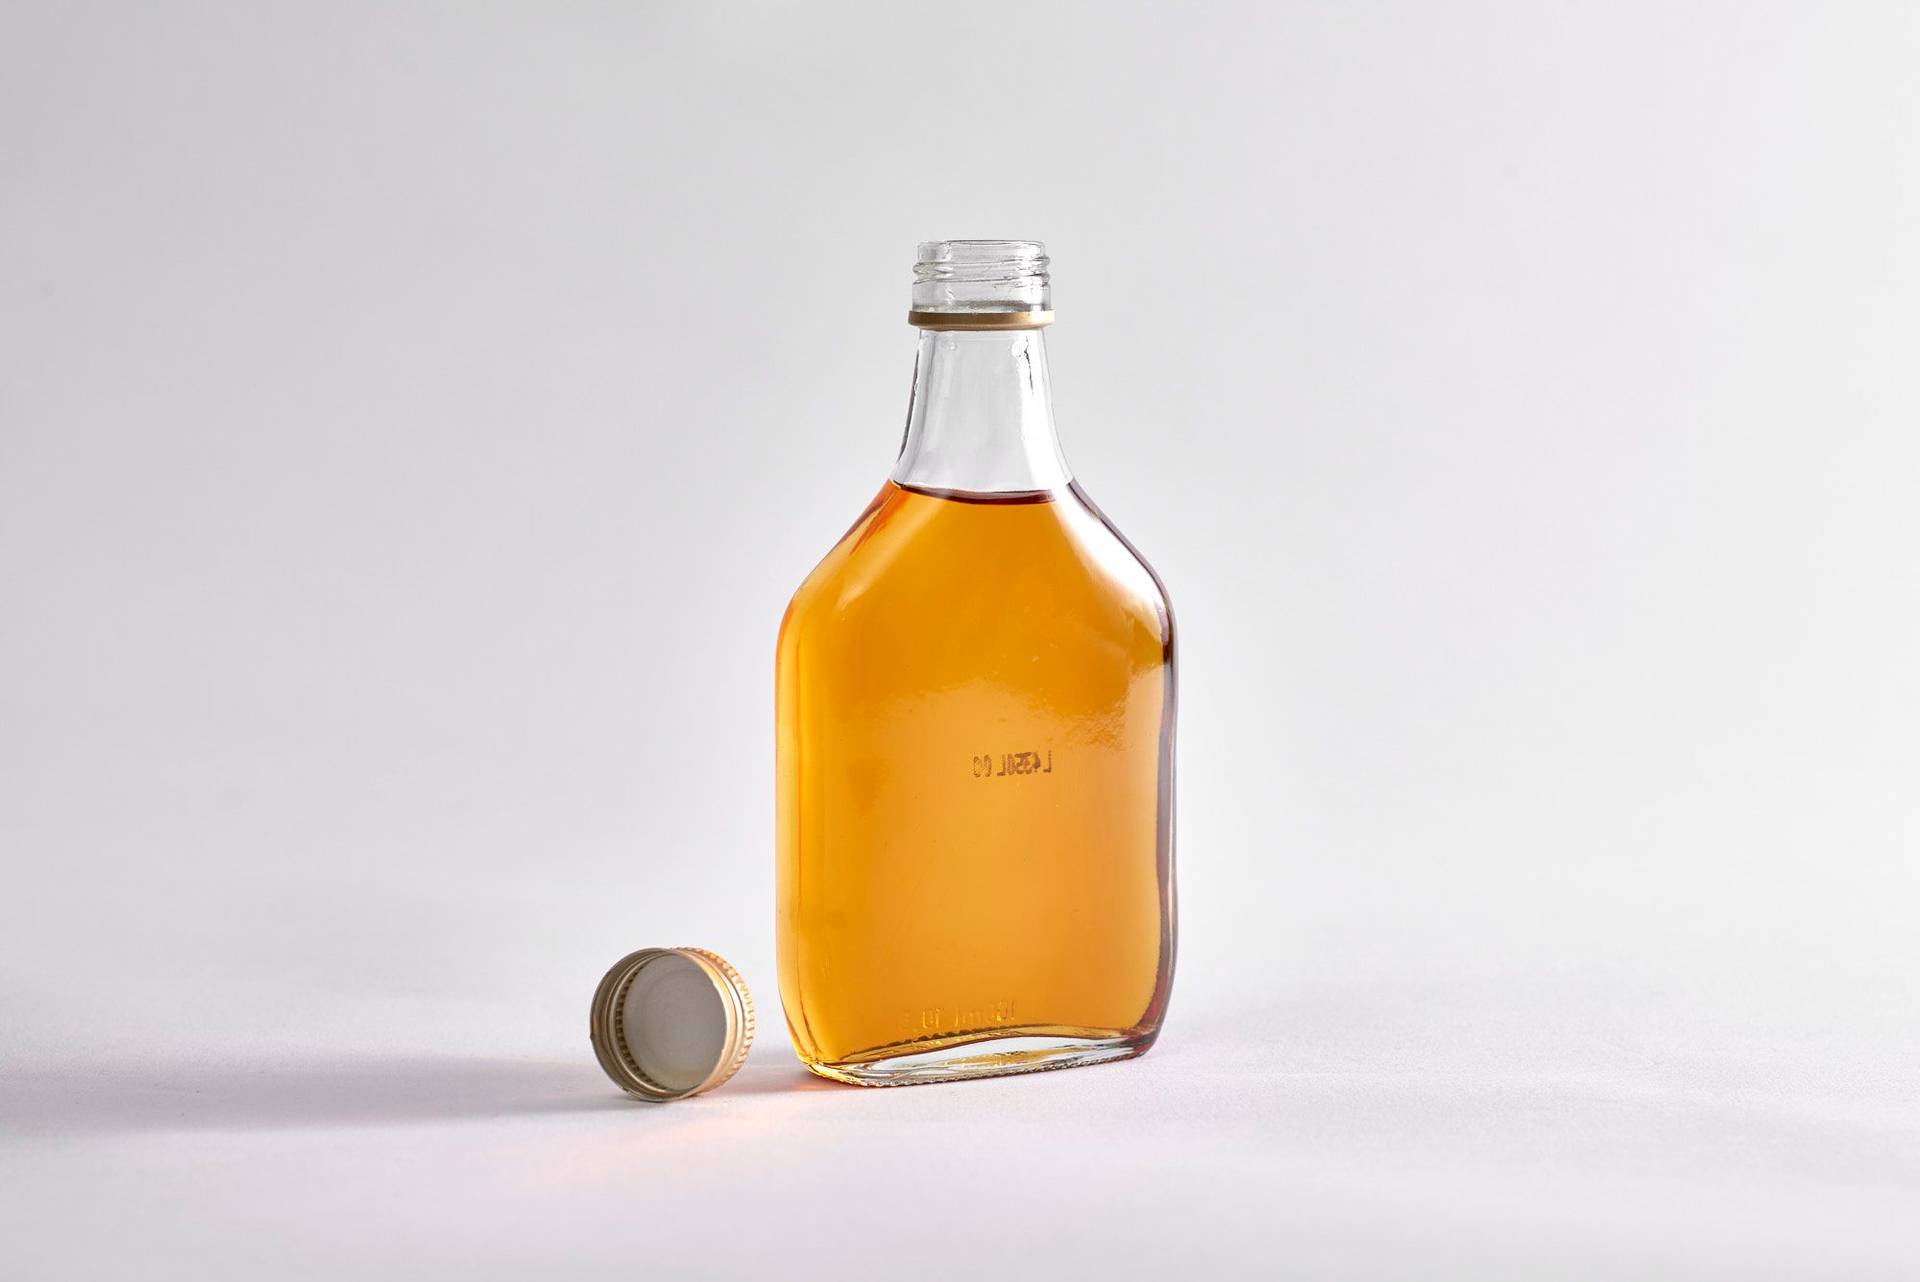 a small bottle of rum on white background